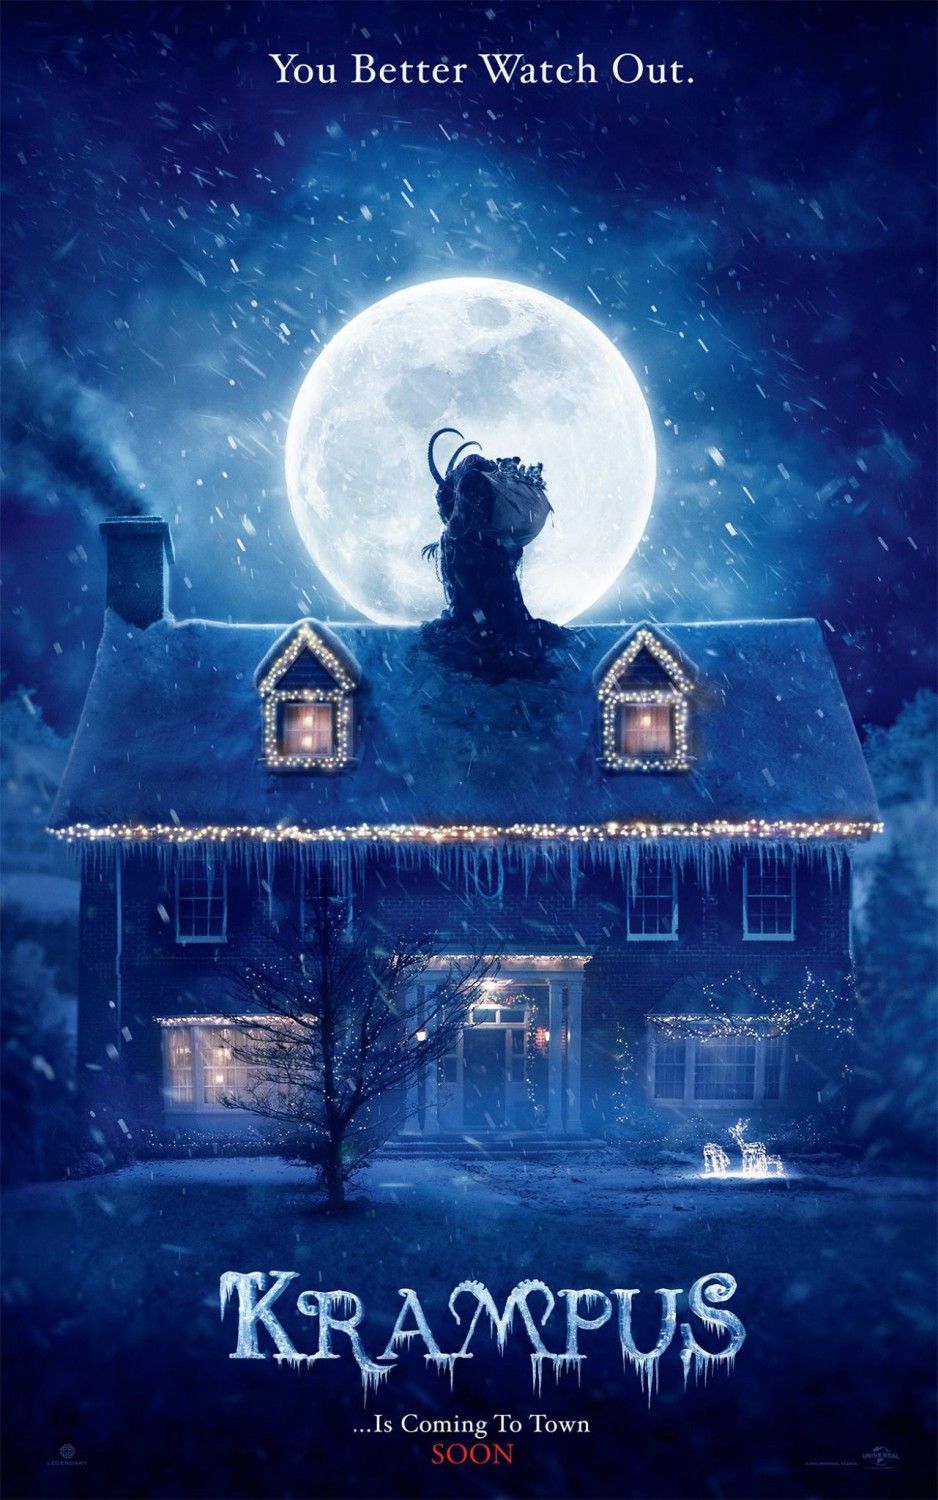 The best scary Christmas movies, from Nightmare to Krampus